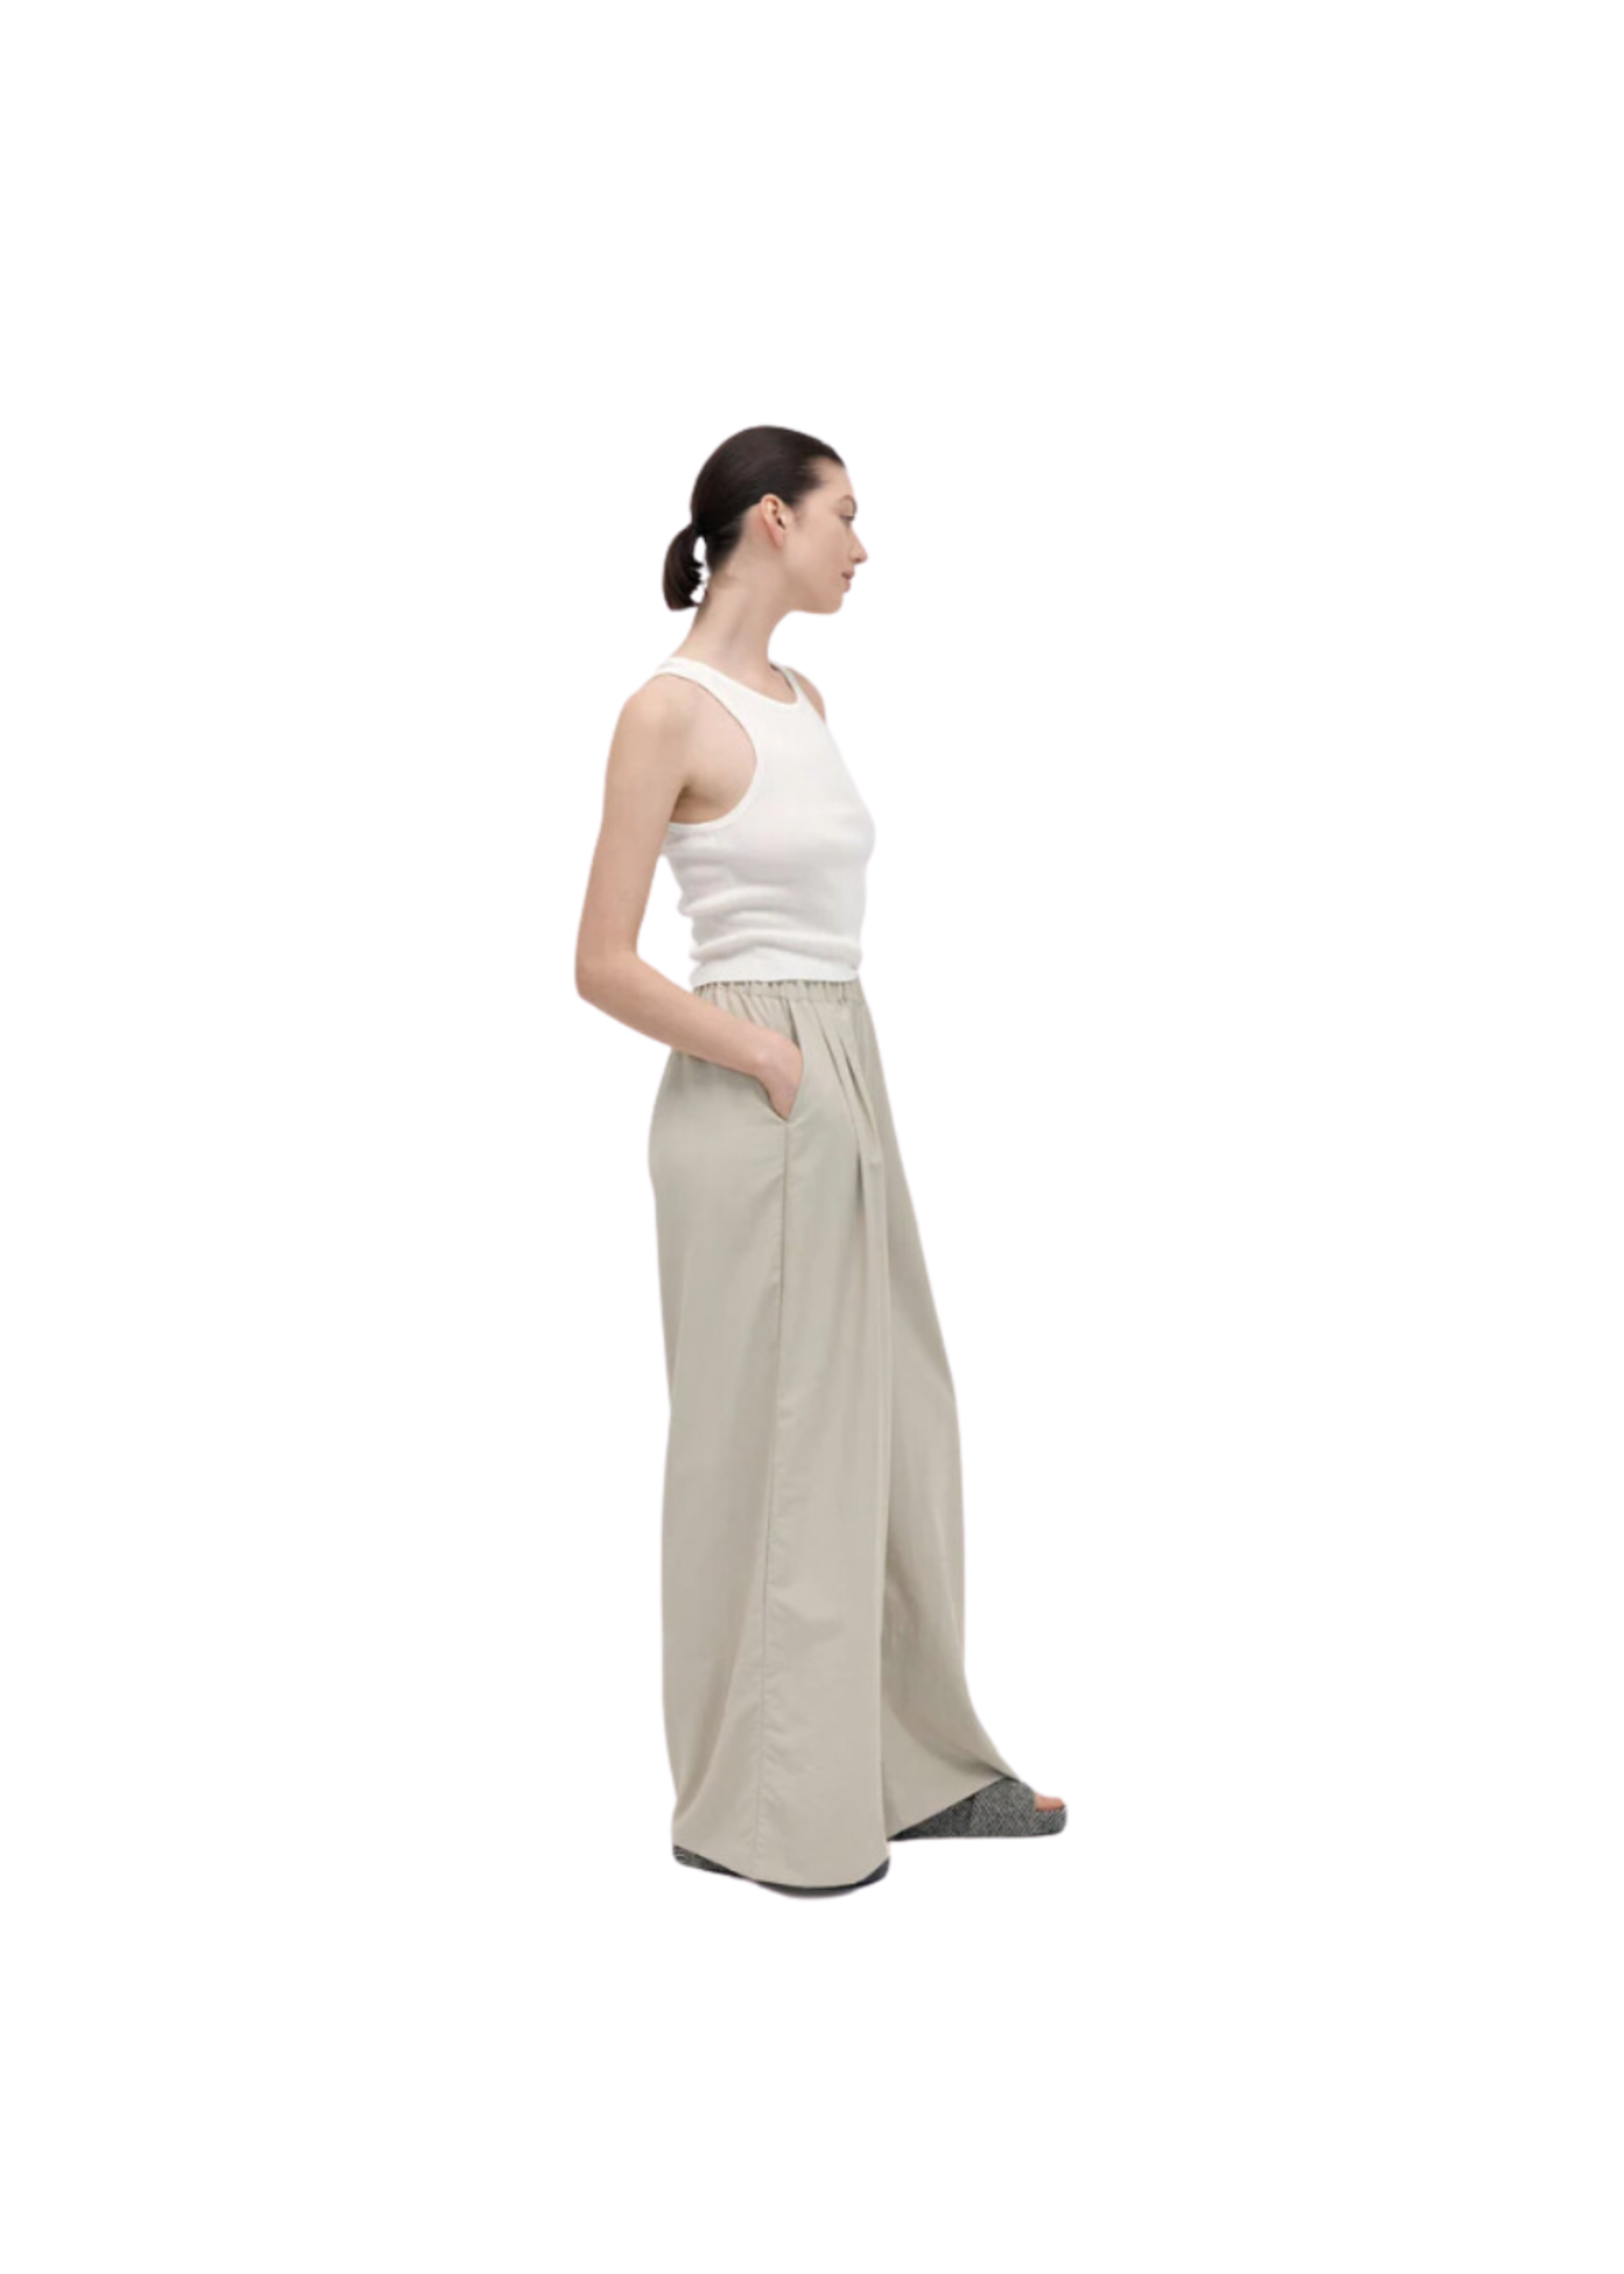 St. Agni Relaxed Pant